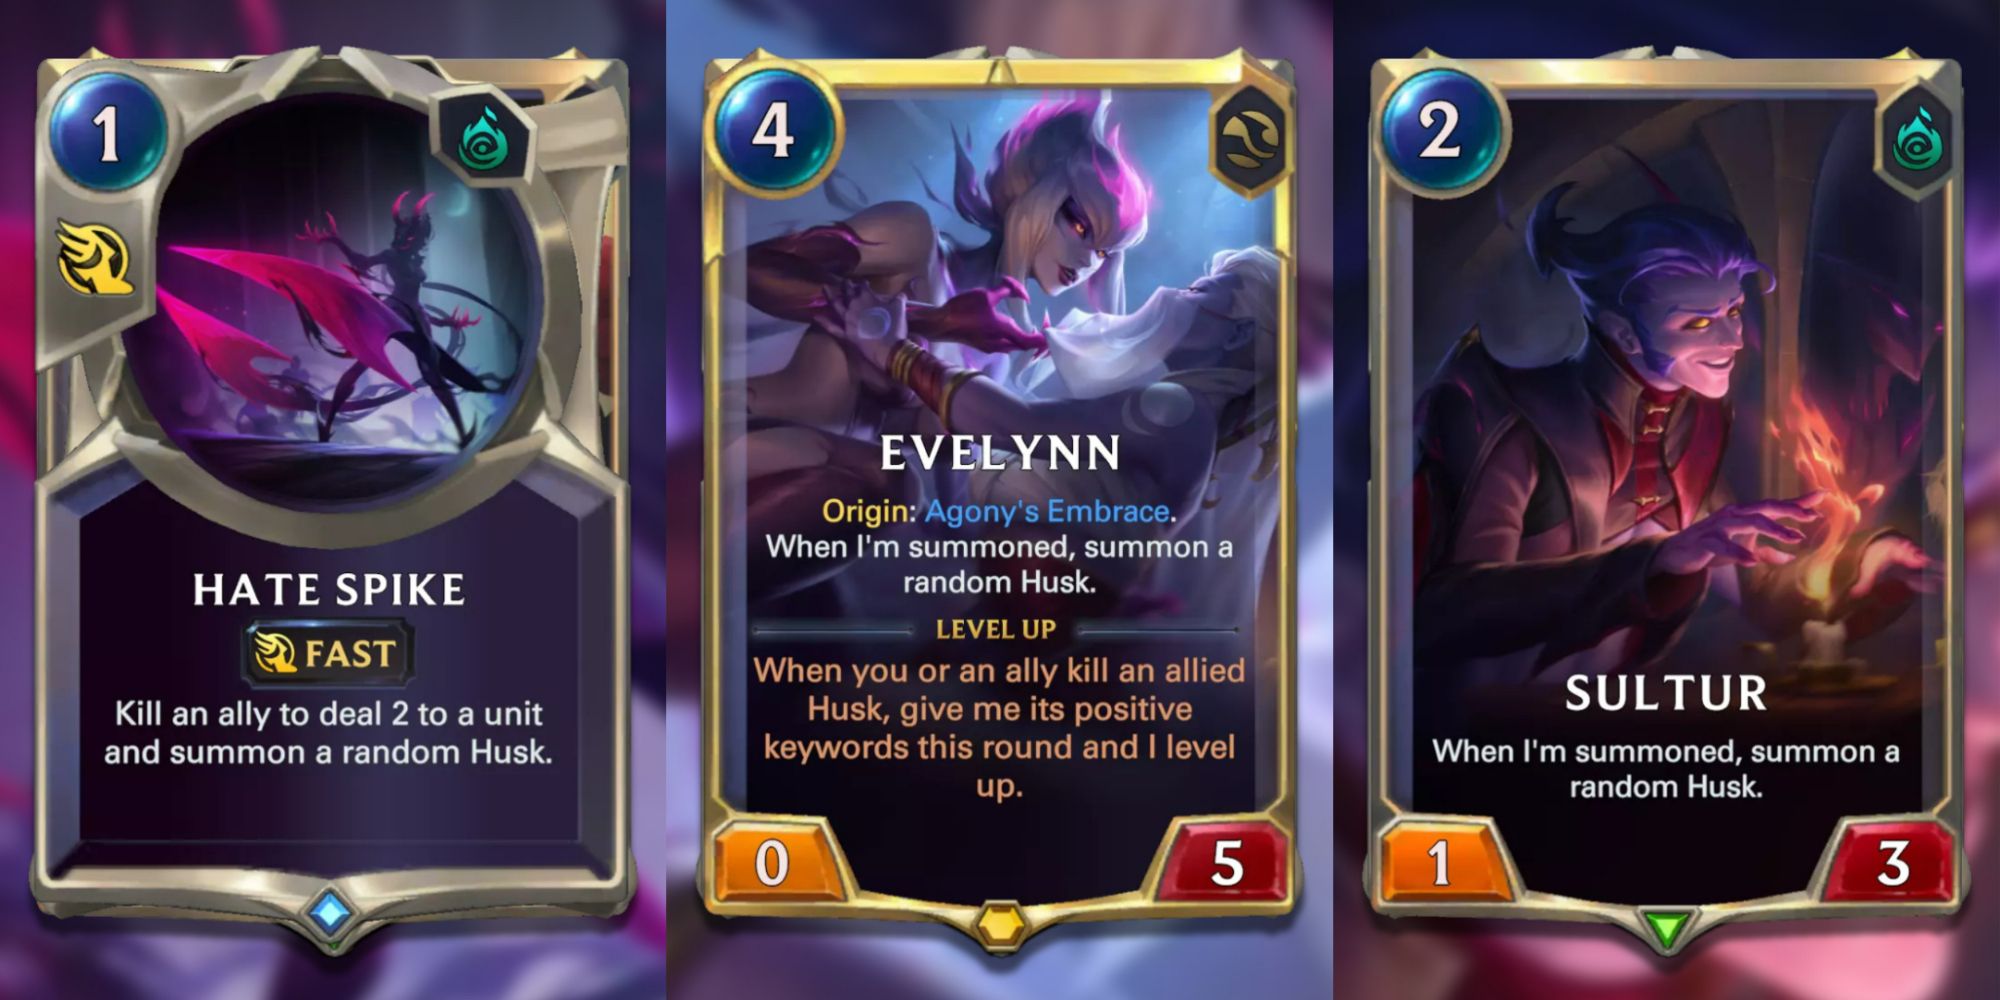 Legends of Runeterra Hate Spike, Sultur, and Evelynn cards